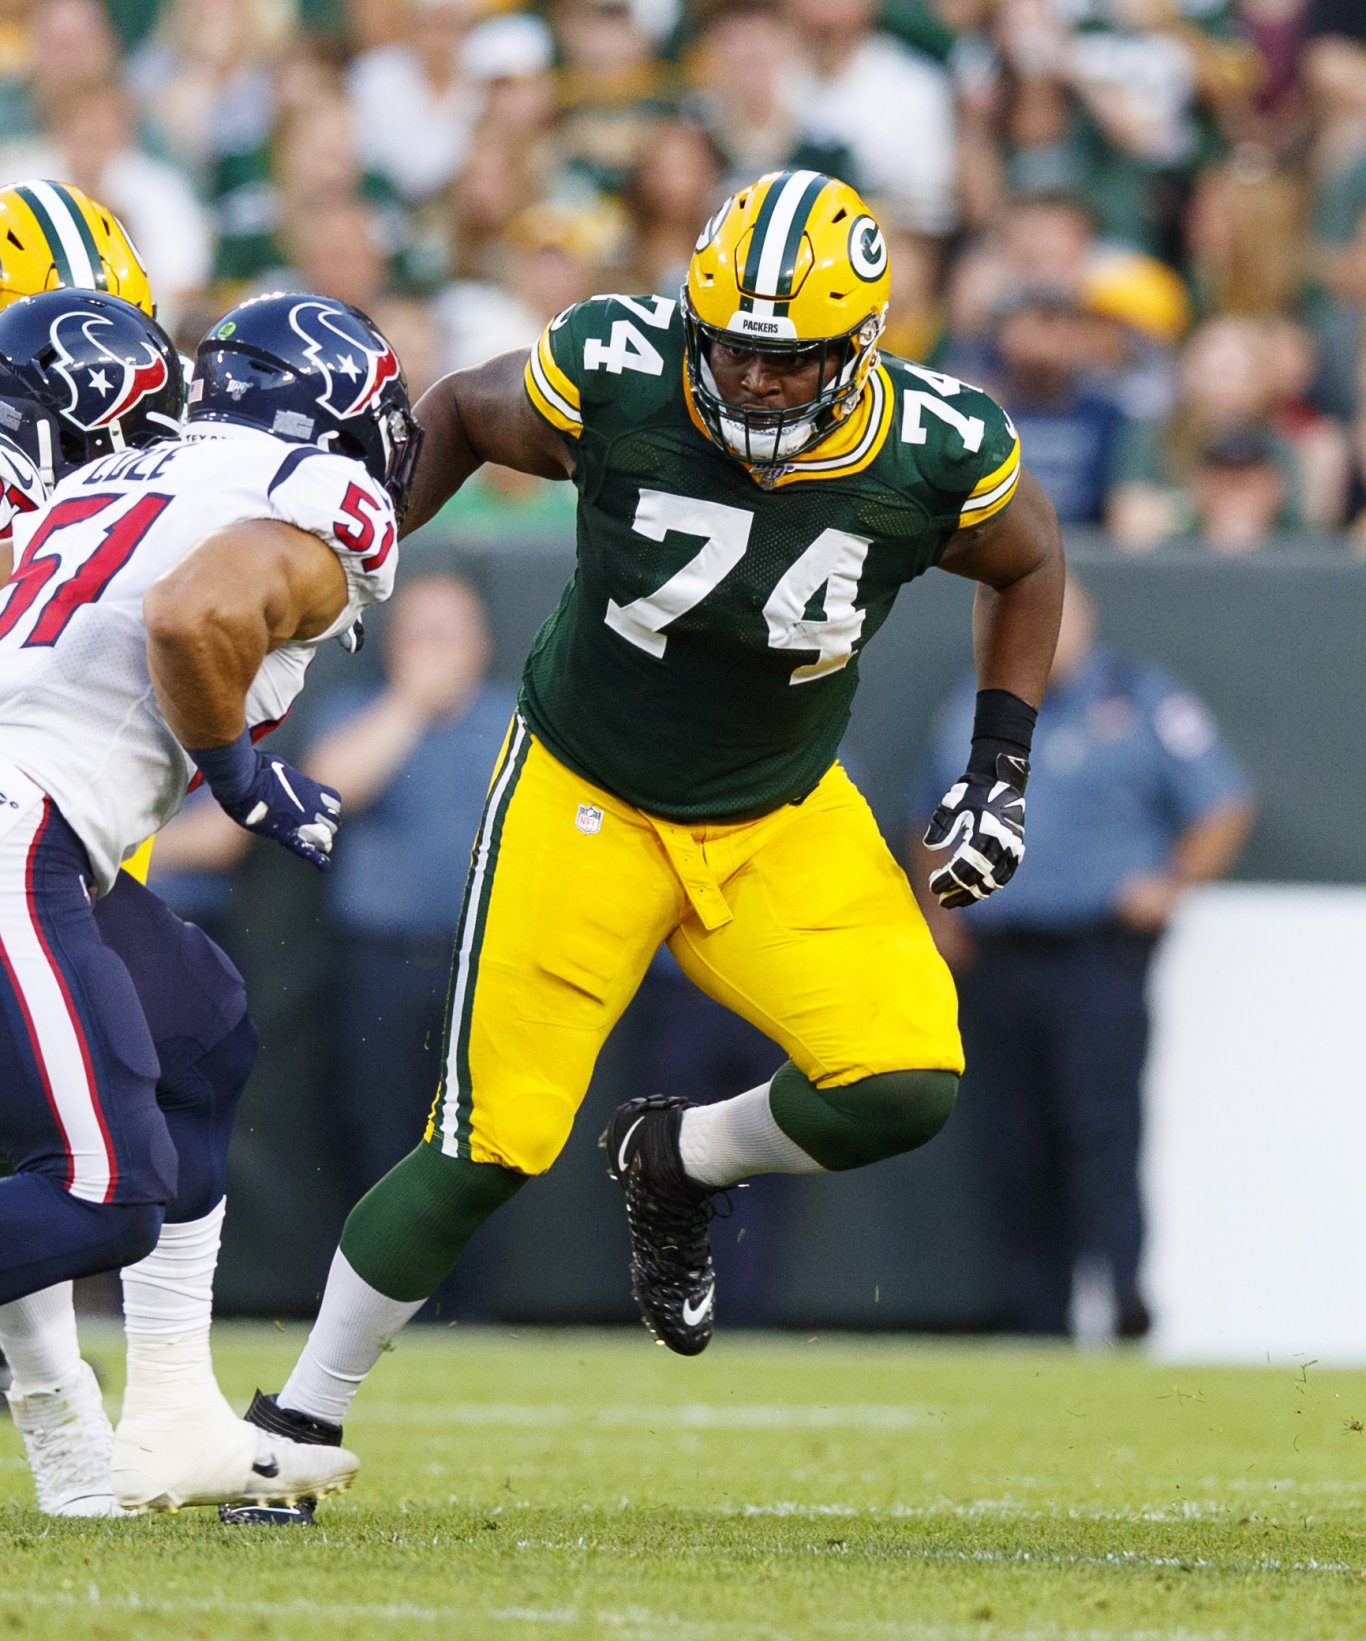 What Will the Packers Offensive Line Look Like in 2021?